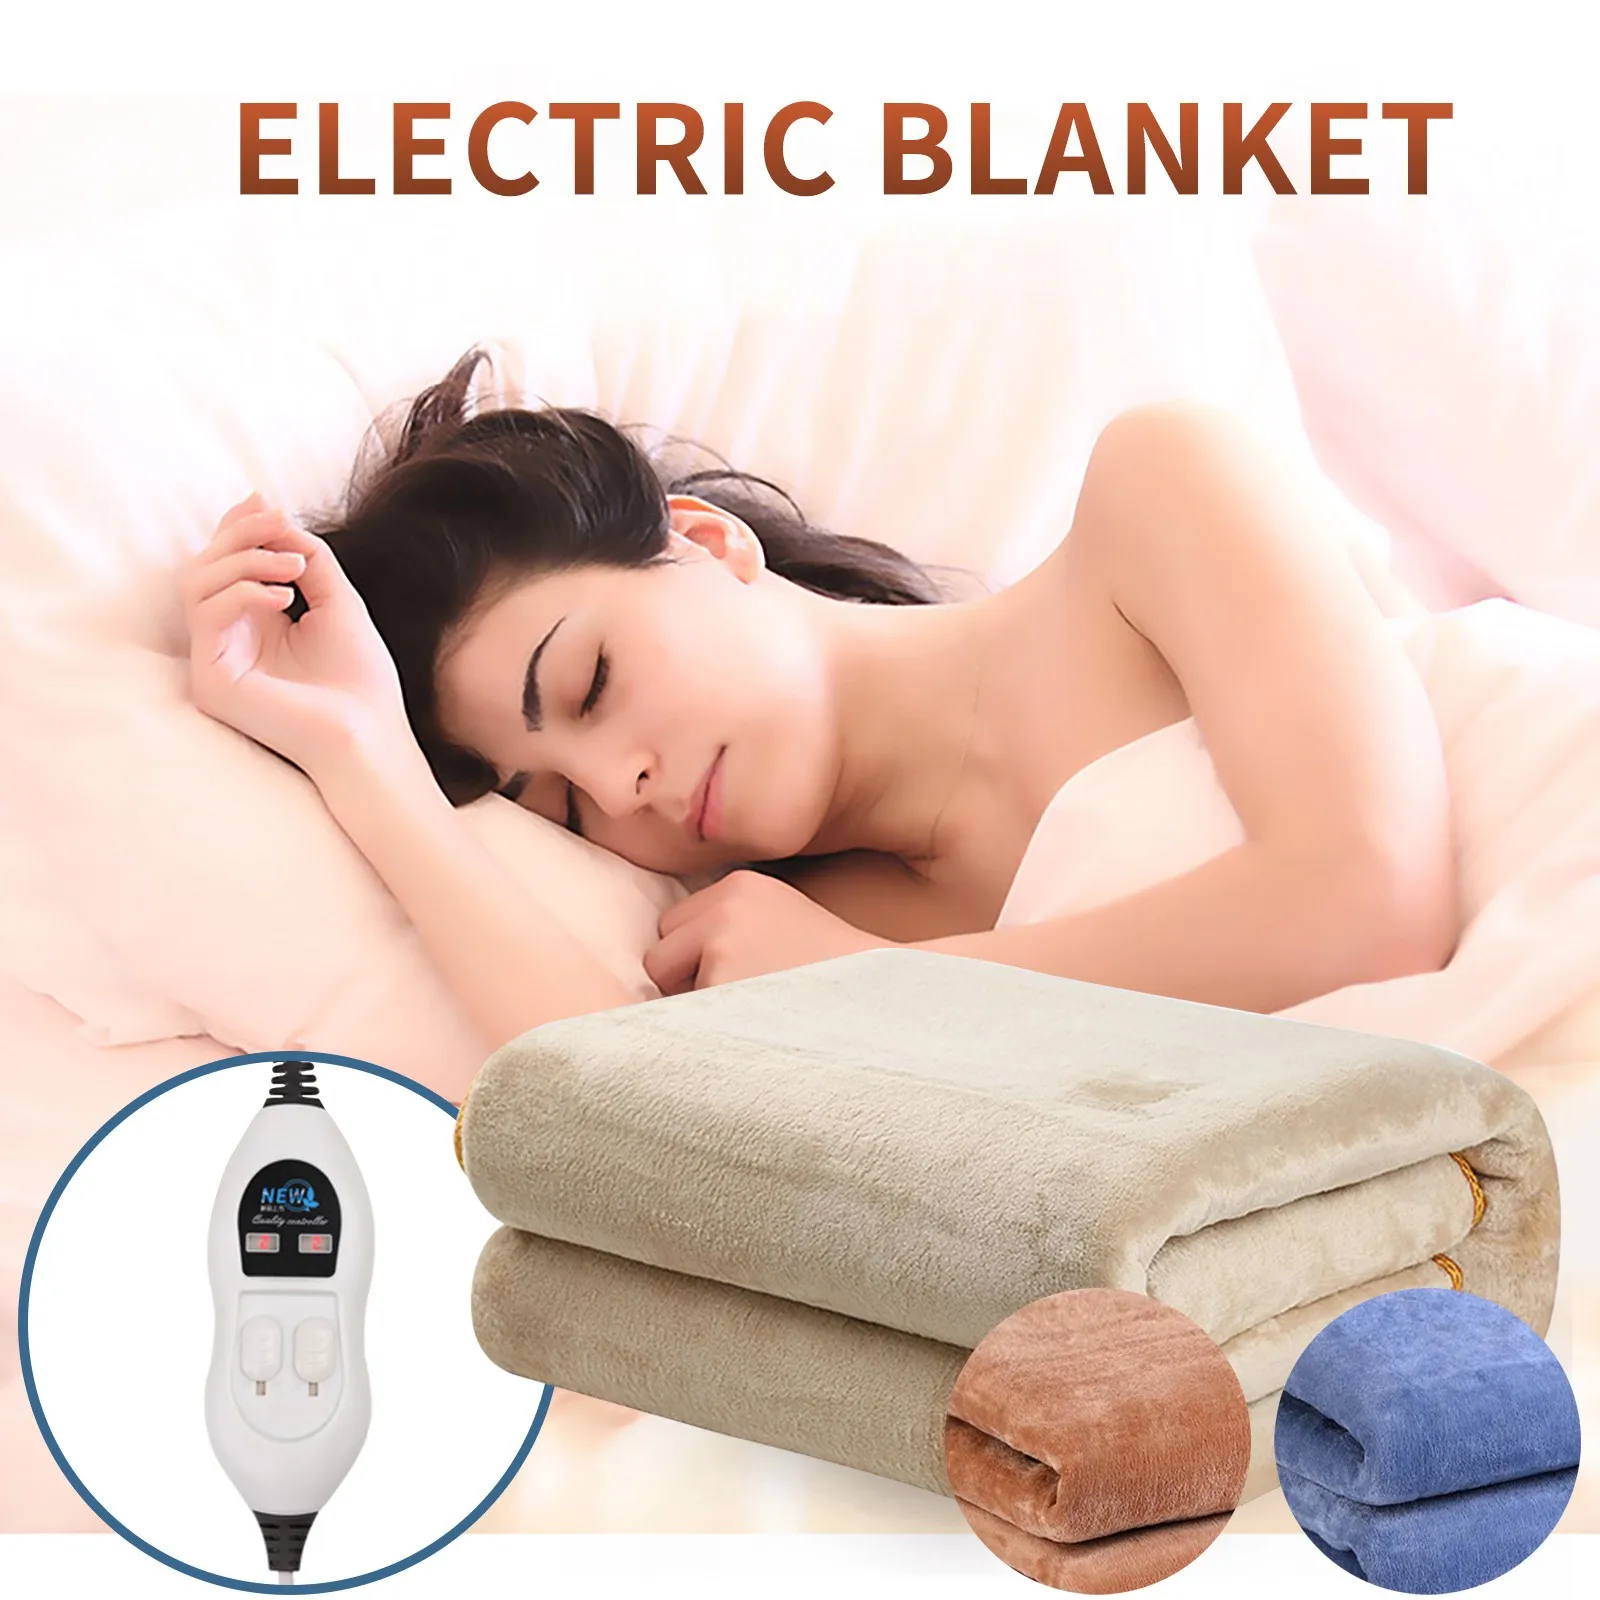 

Cozy Soft Flannel Electric Heated Winter Blanket Electric Blanket Electric Heated Soft Temperature Control Cozy Soft Blanket